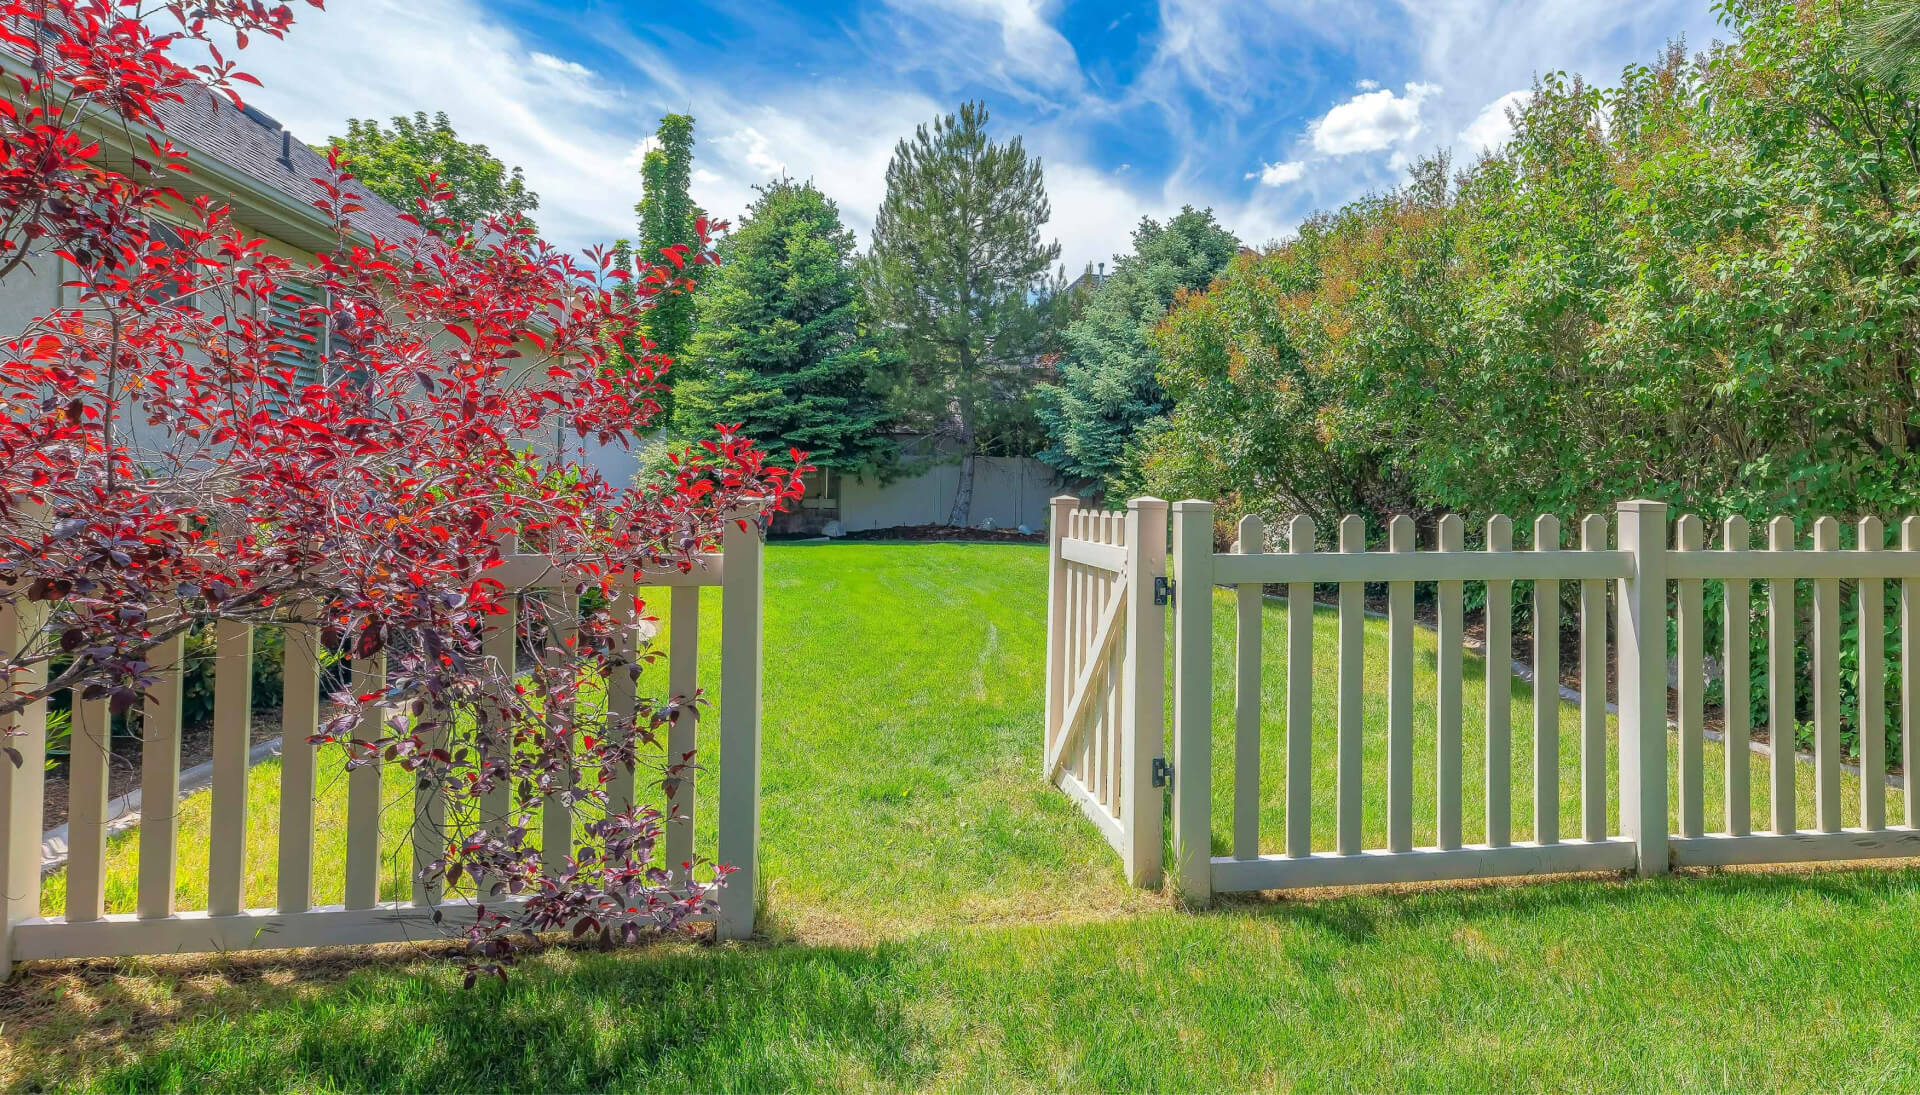 Fence gate installation services in St Petersburg